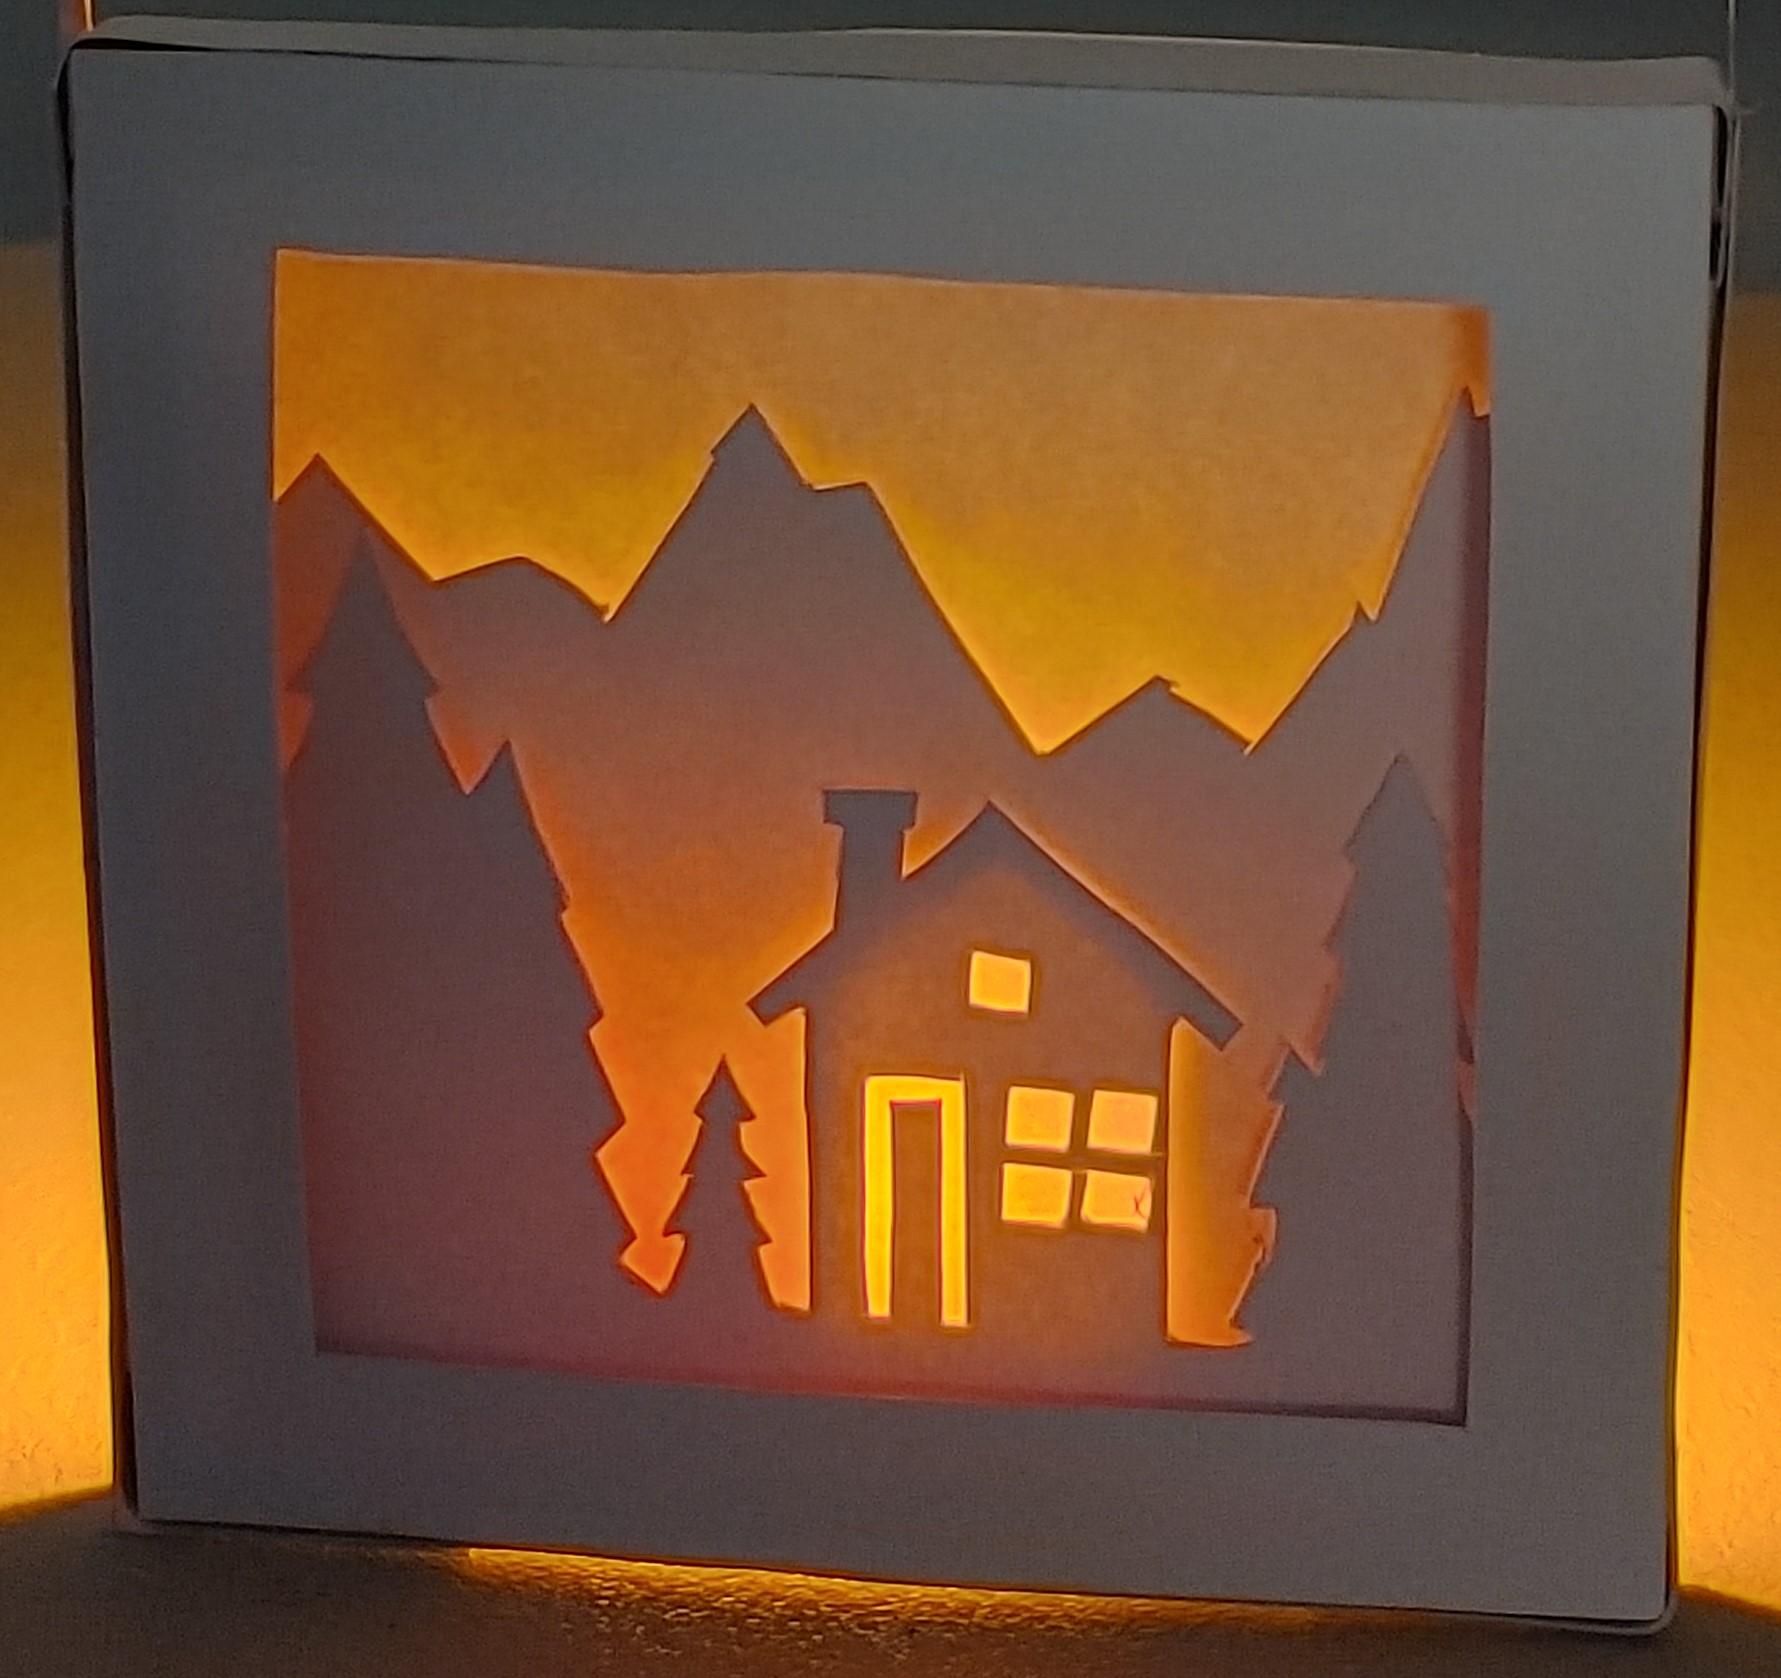 A cabin with warm lighting